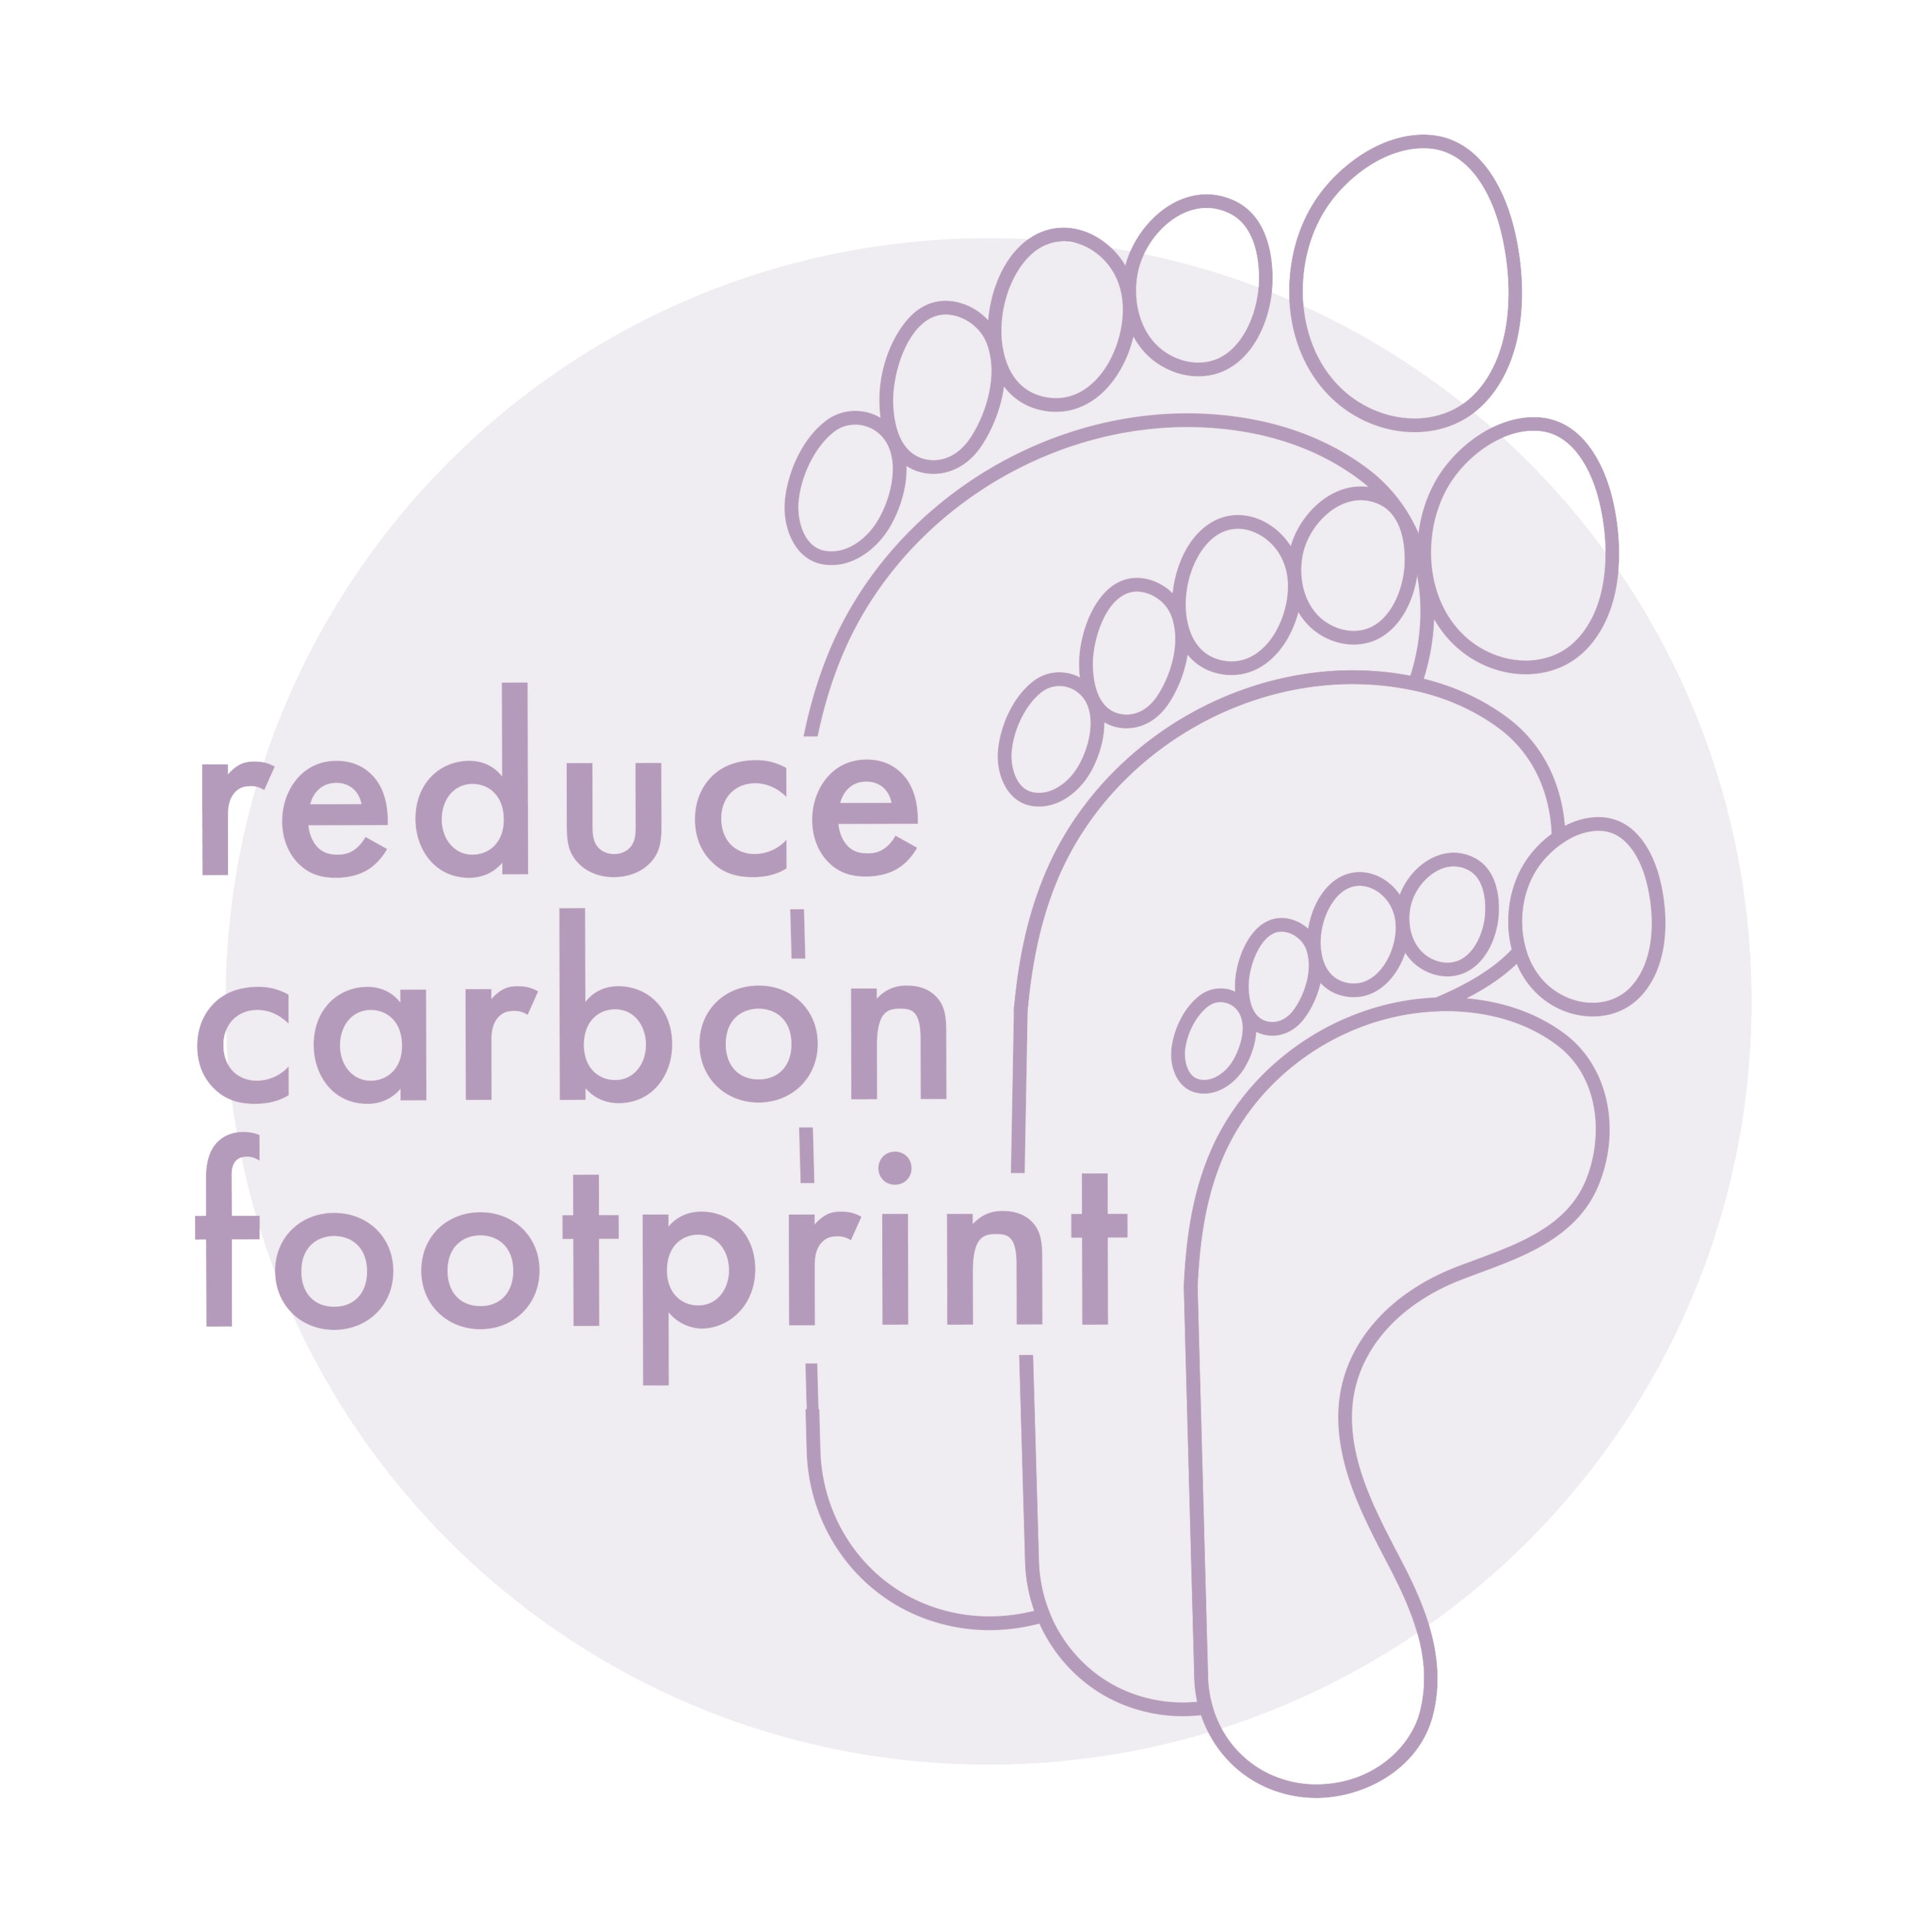 illustrated footprints carbon image Text